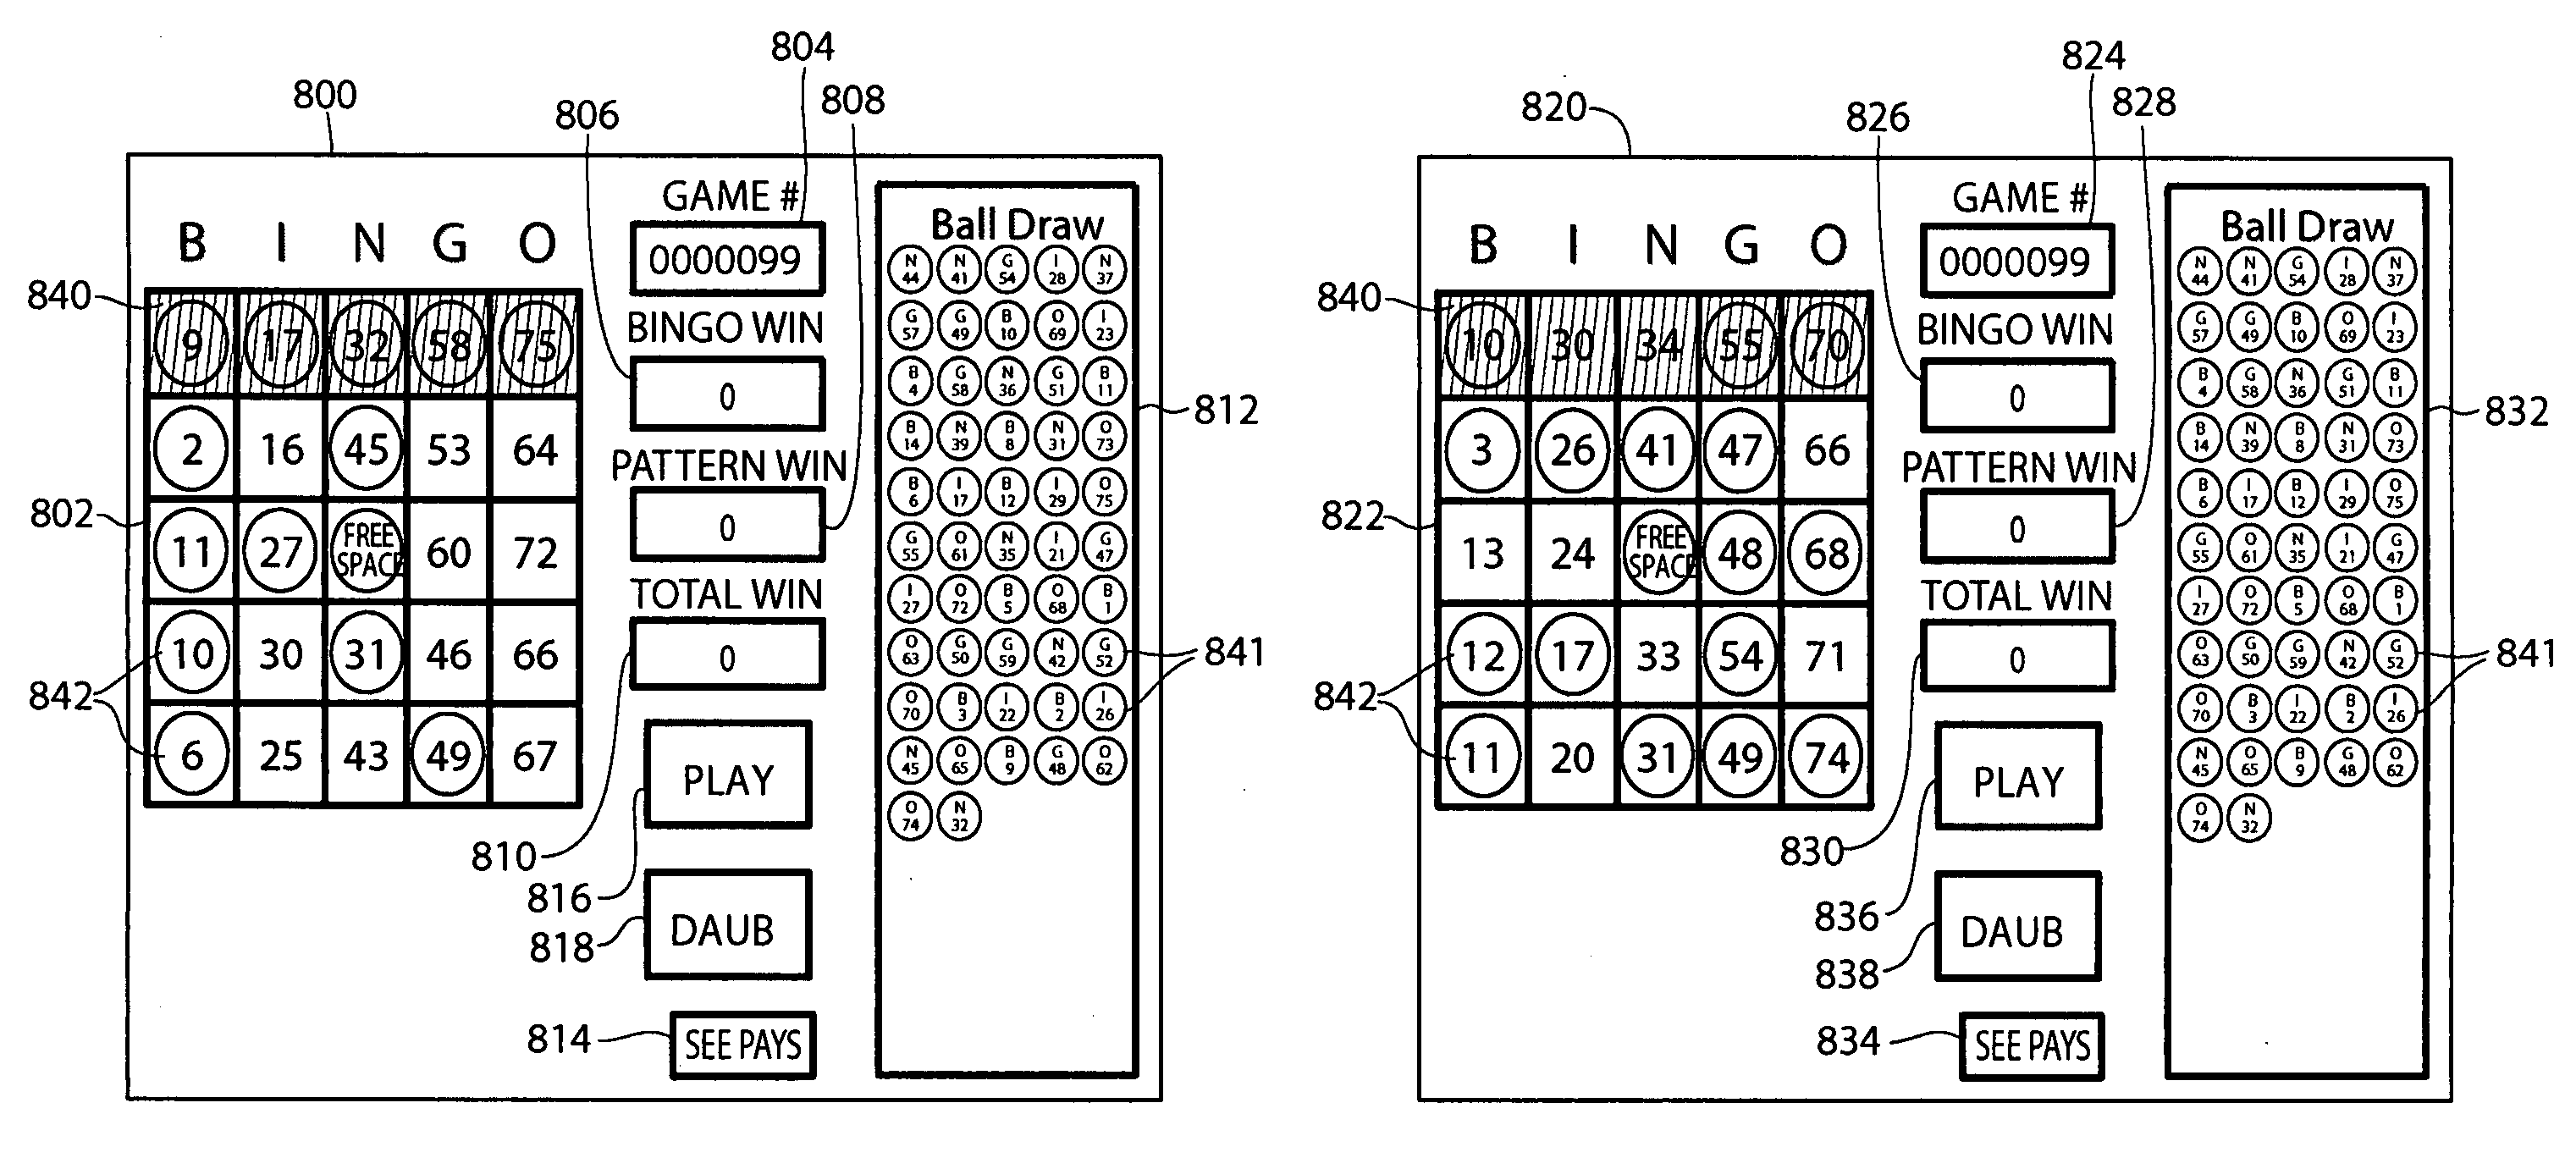 Multi-player bingo game with multiple cards per player